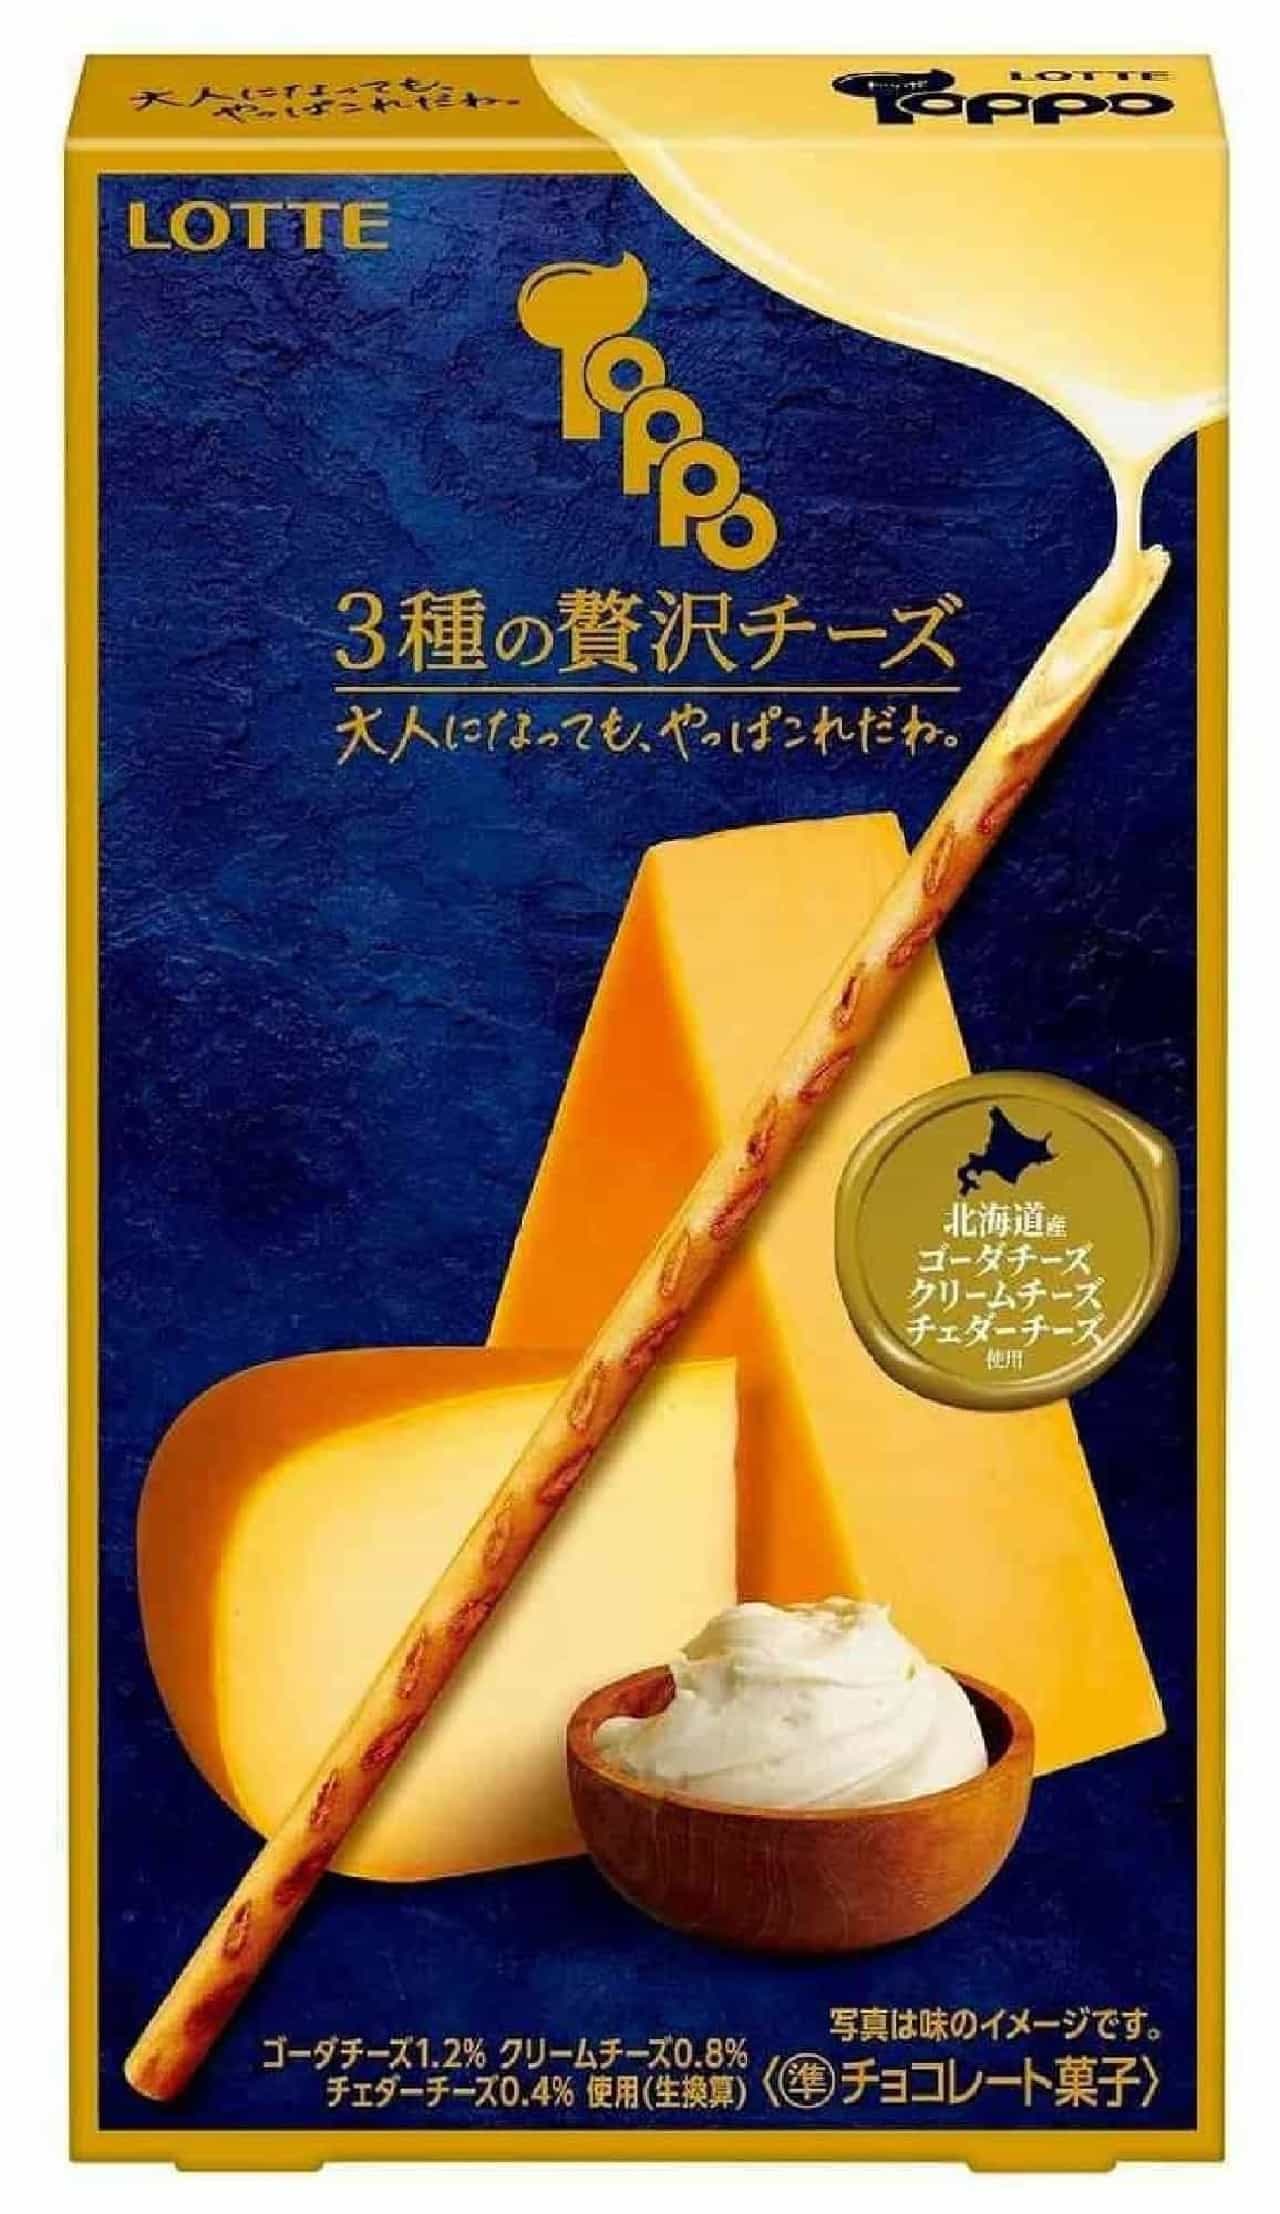 Lotte "Toppo [3 kinds of luxurious cheese